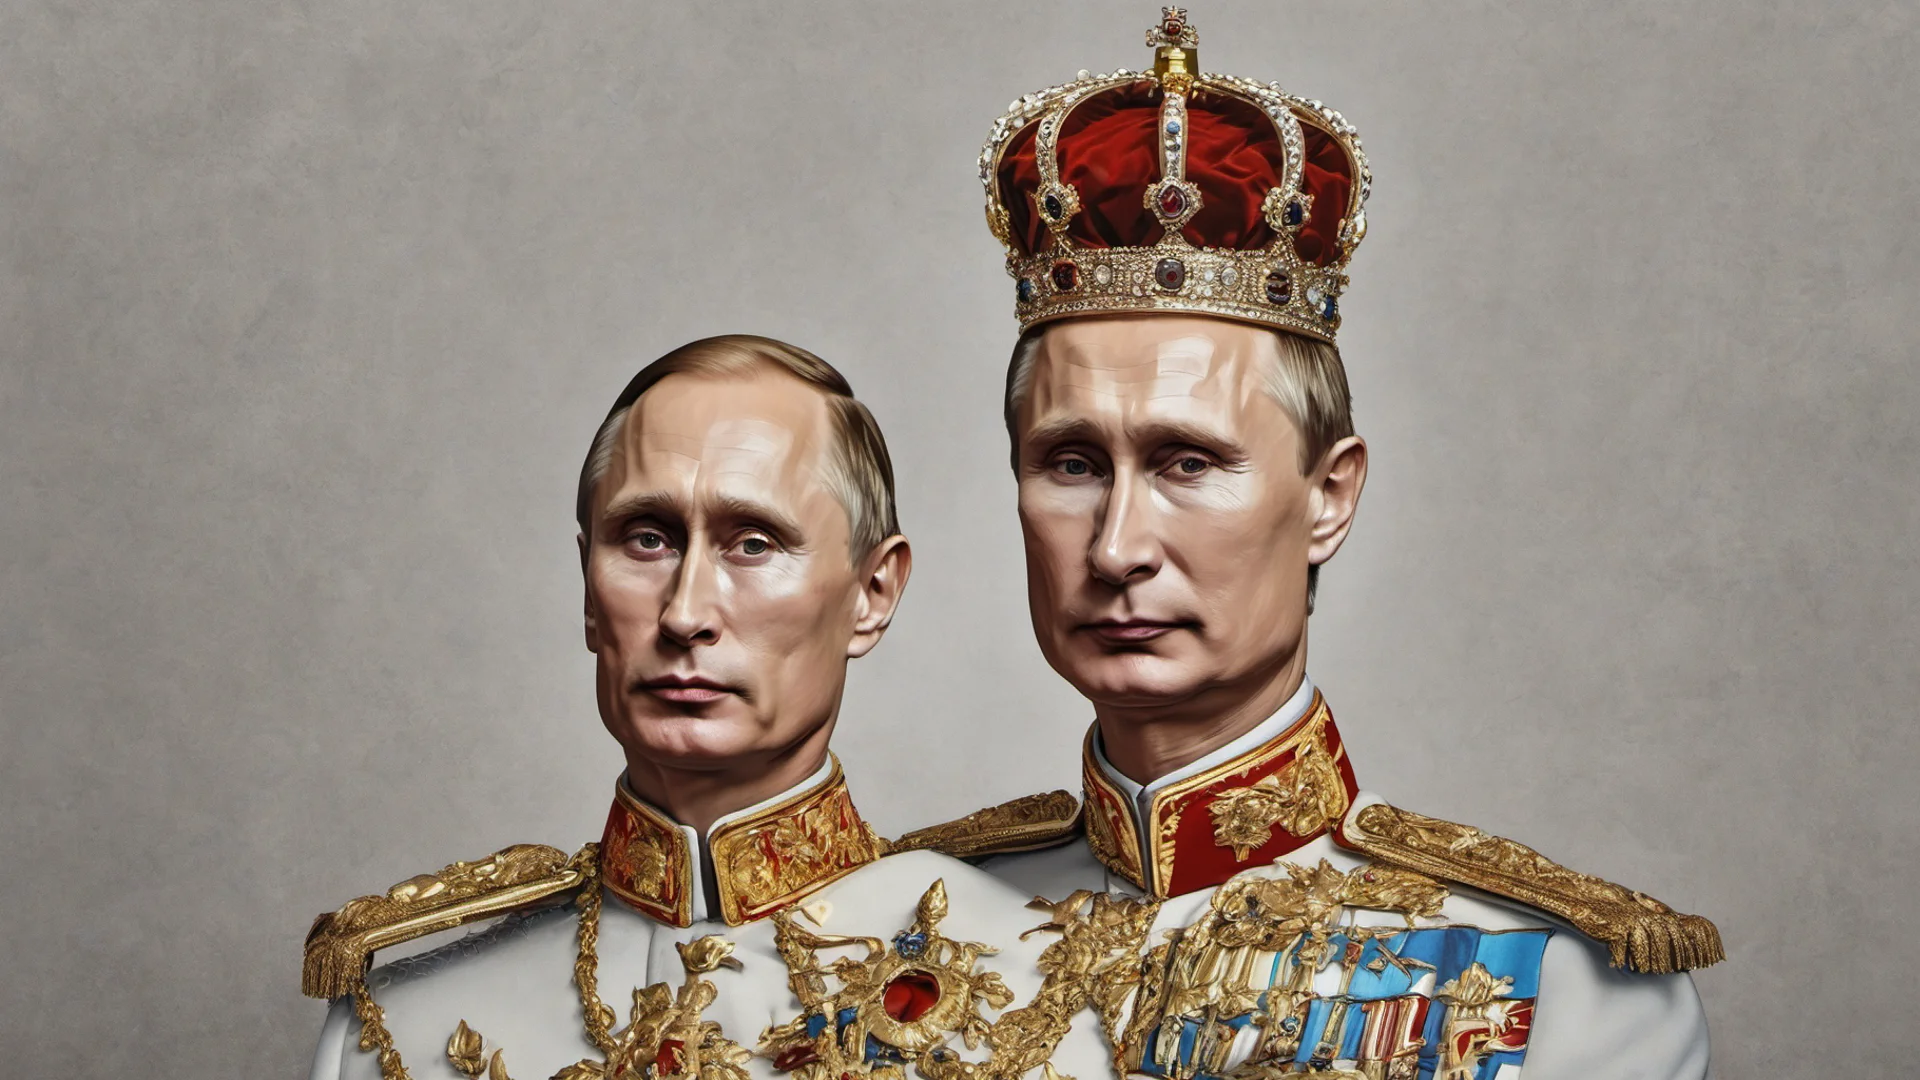 vladmir putin king with crown amazing awesome portrait 2 wide